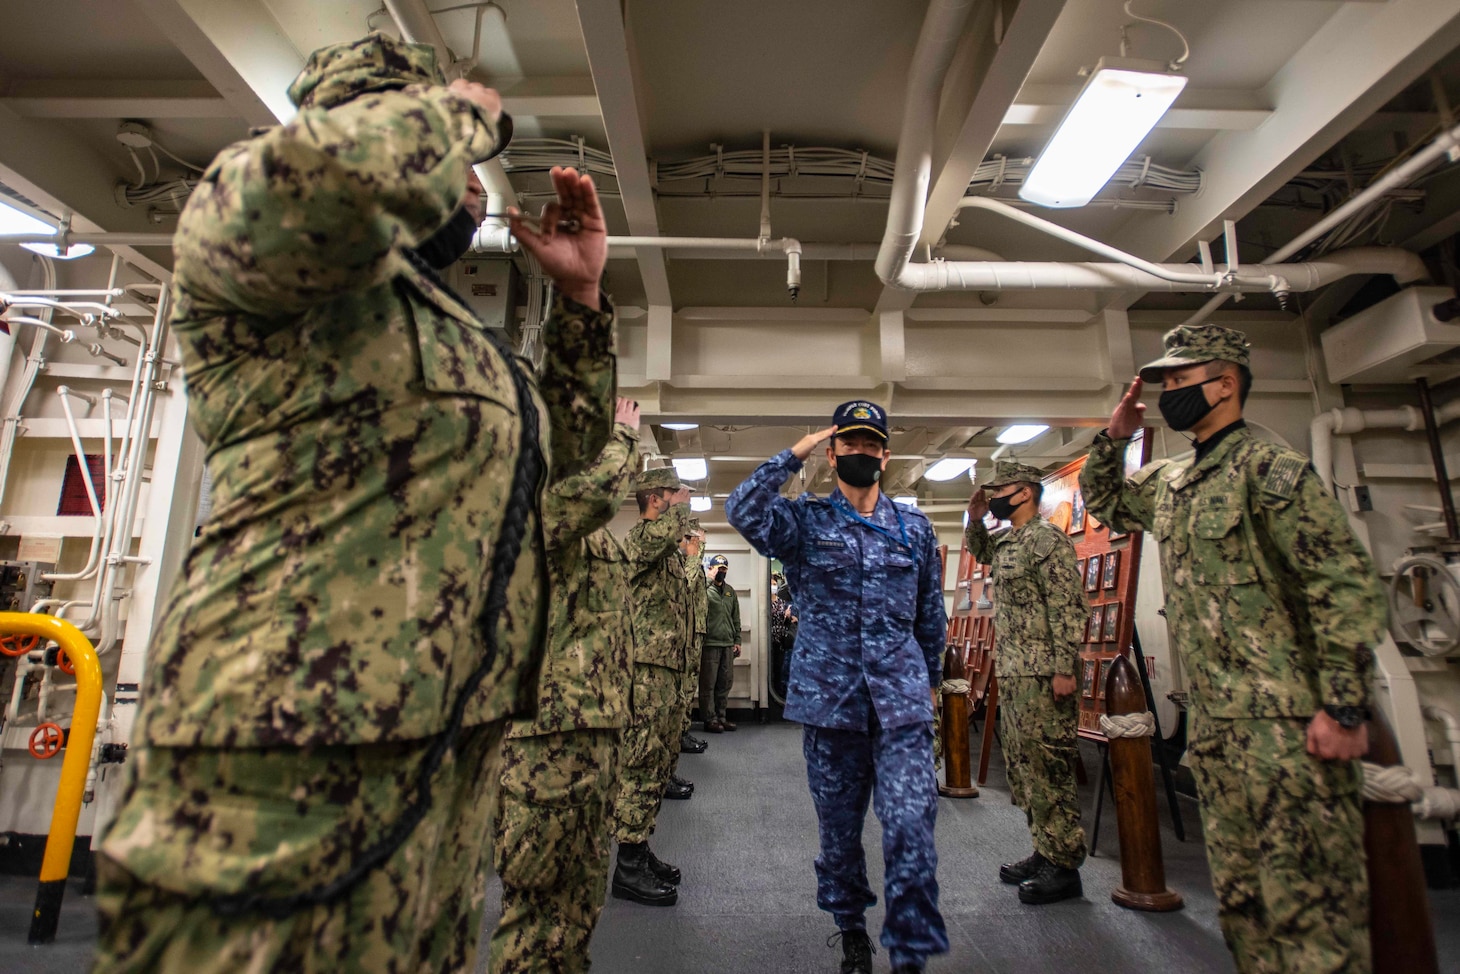 210415-N-WS494-1036 YOKOSUKA, Japan (April 15, 2021) Vice Adm. SAITO Akira, commander of Japan Maritime Self-Defense Force (JMSDF) Fleet Escort Force, salutes sideboys on the ceremonial quarterdeck of the U.S. Navy’s only forward-deployed aircraft carrier, USS Ronald Reagan (CVN 76). Leadership from Carrier Strike Group (CSG) 5 and Destroyer Squadron (DESRON) 15 met with the commander of JMSDF Fleet Escort Force aboard Ronald Reagan for a ship tour and staff discussions. Ronald Reagan, the flagship of Carrier Strike Group 5, provides a combat-ready force that protects and defends the United States, as well as the collective maritime interests of its allies and partners in the Indo-Pacific region. (U.S. Navy Photo by Mass Communication Specialist 3rd Class Quinton A. Lee)